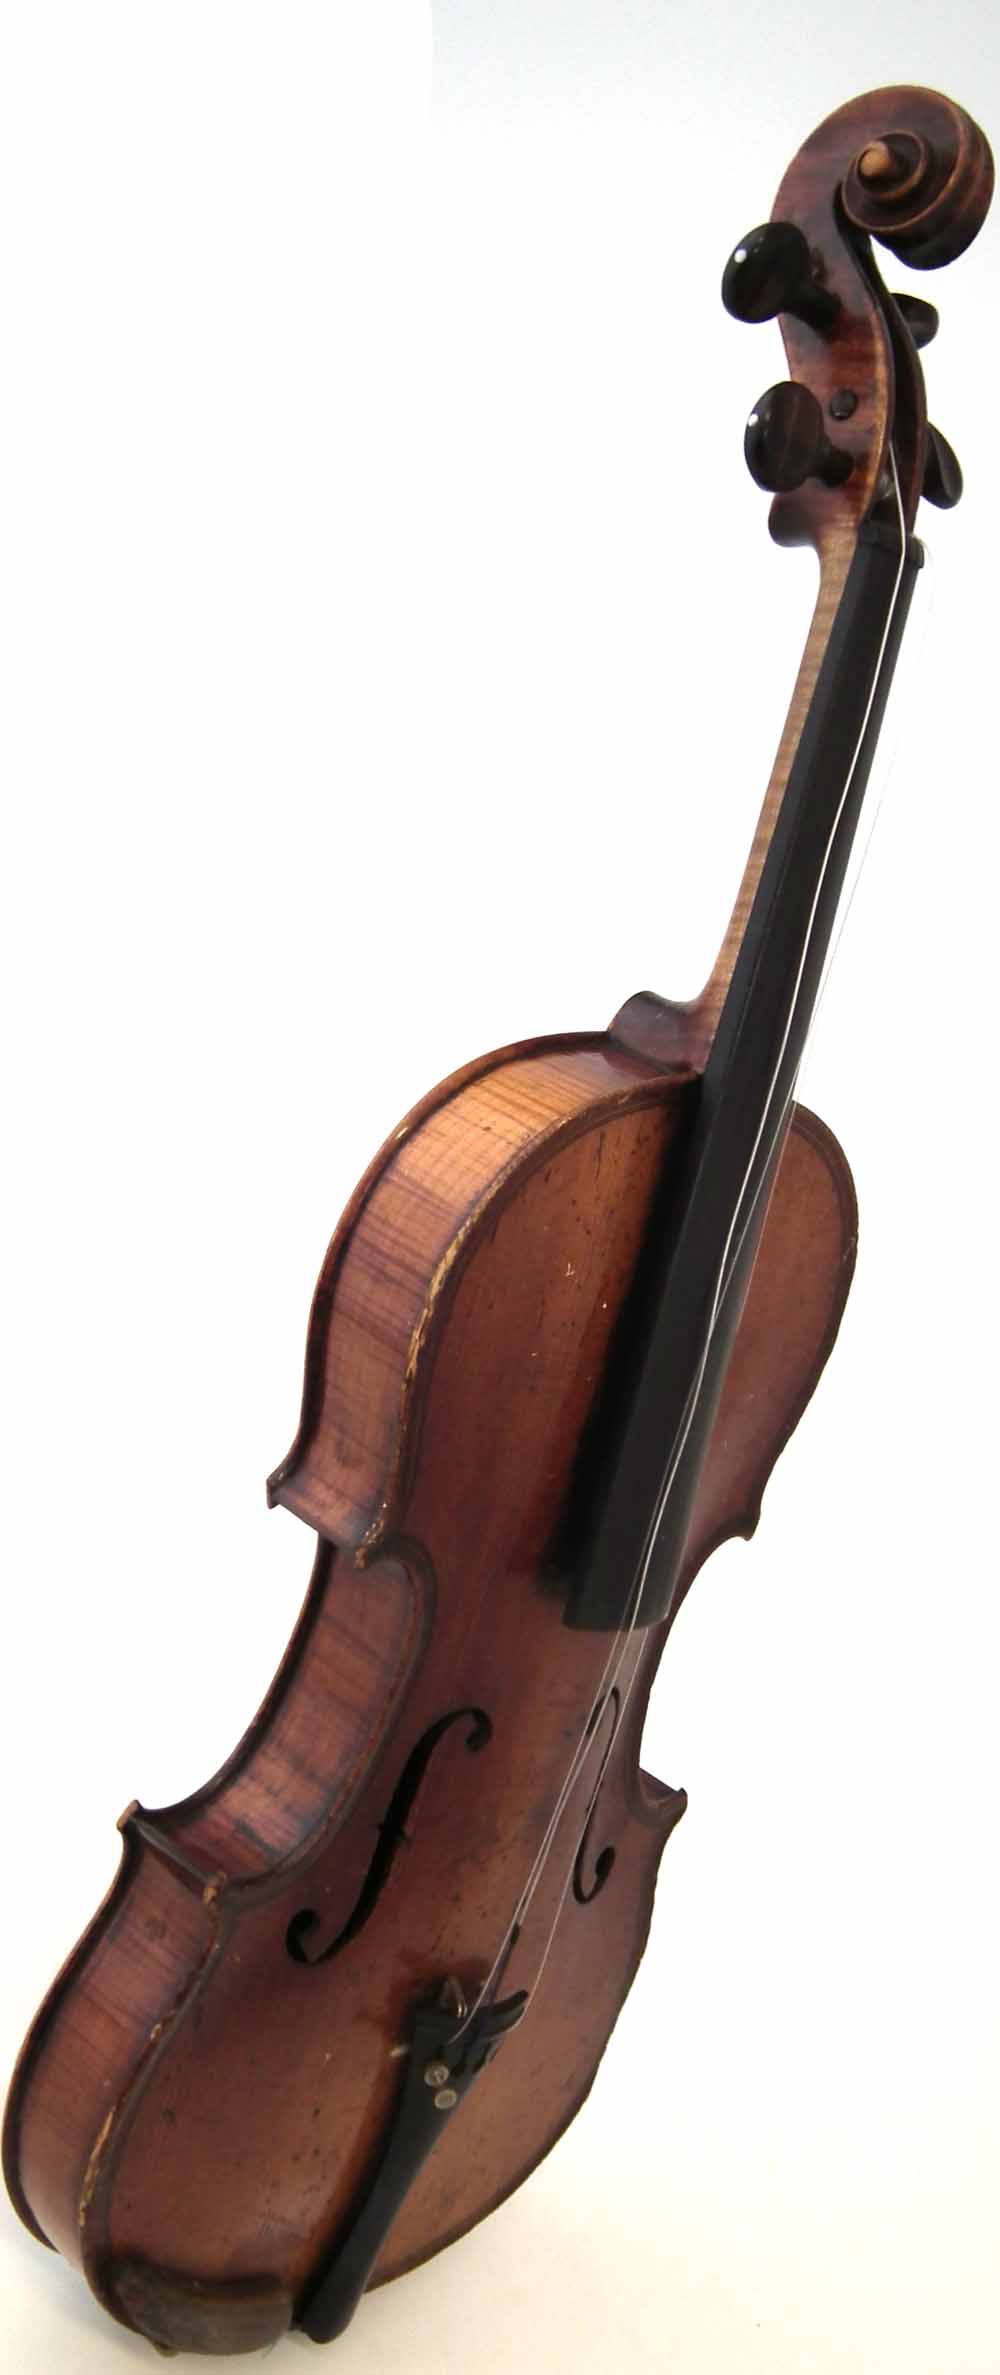 Violin in the style of Gaspar da Salo, with one piece tightly flamed back, double line purfling, - Image 5 of 17